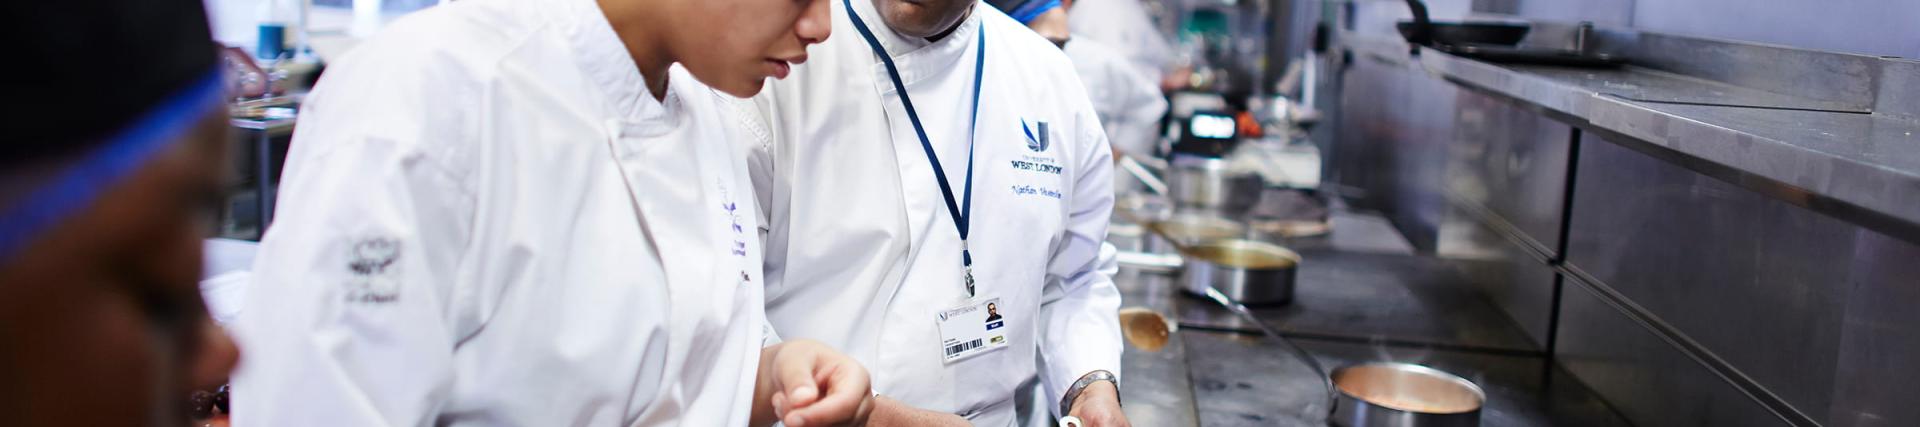 A male chef instructing a female student in Pillars Restaurant kitchen